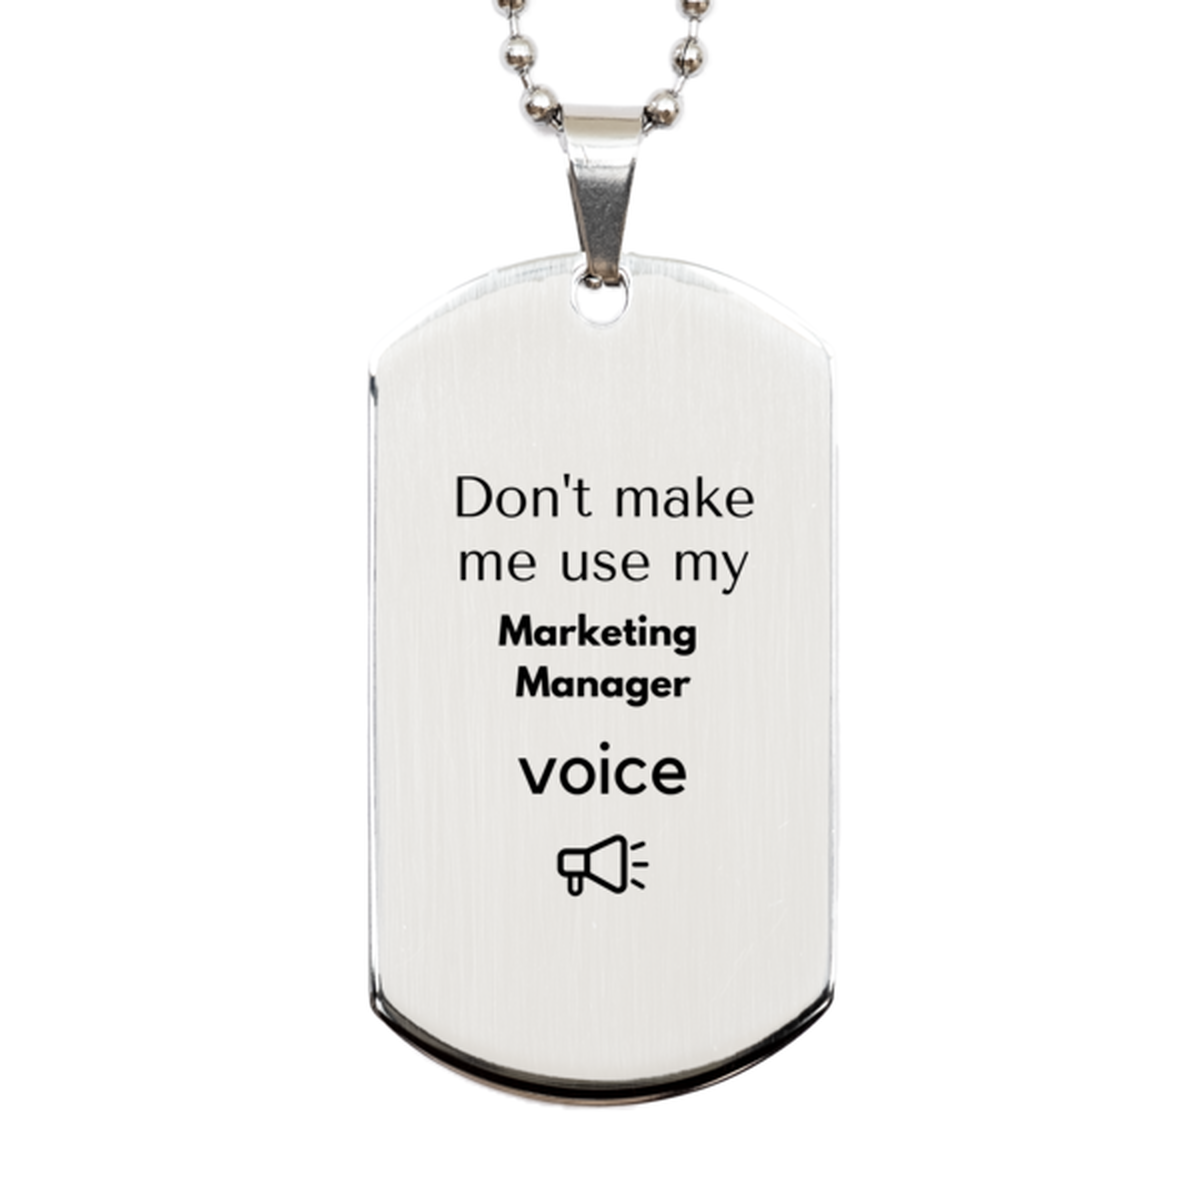 Don't make me use my Marketing Manager voice, Sarcasm Marketing Manager Gifts, Christmas Marketing Manager Silver Dog Tag Birthday Unique Gifts For Marketing Manager Coworkers, Men, Women, Colleague, Friends